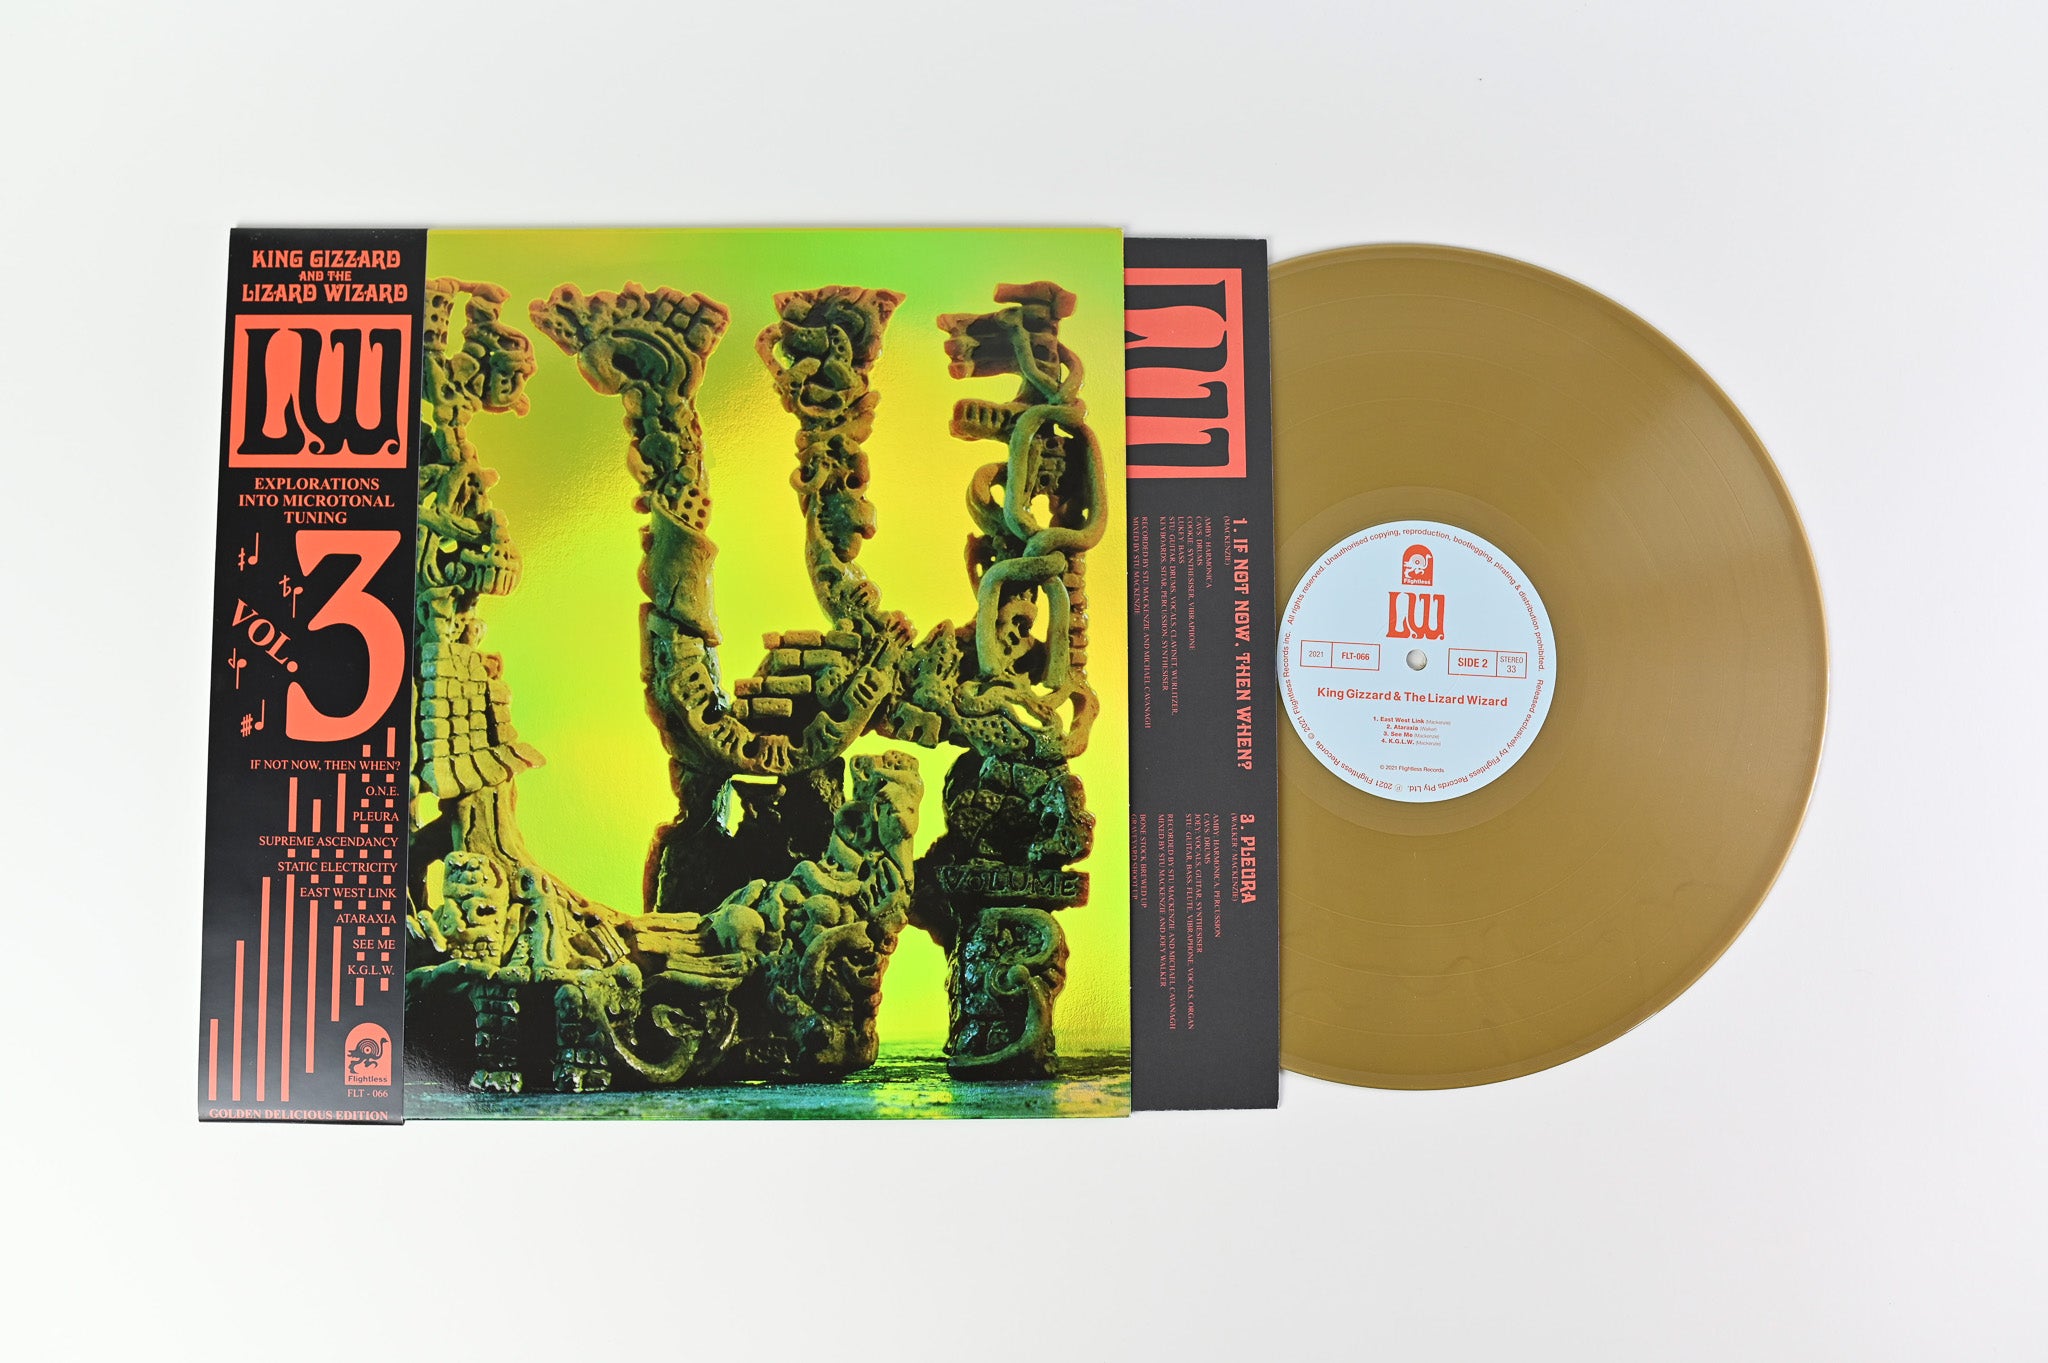 King Gizzard And The Lizard Wizard - L.W. (Explorations Into Microtonal Tuning Volume 3) on Flightless Ltd Golden Delicious Vinyl